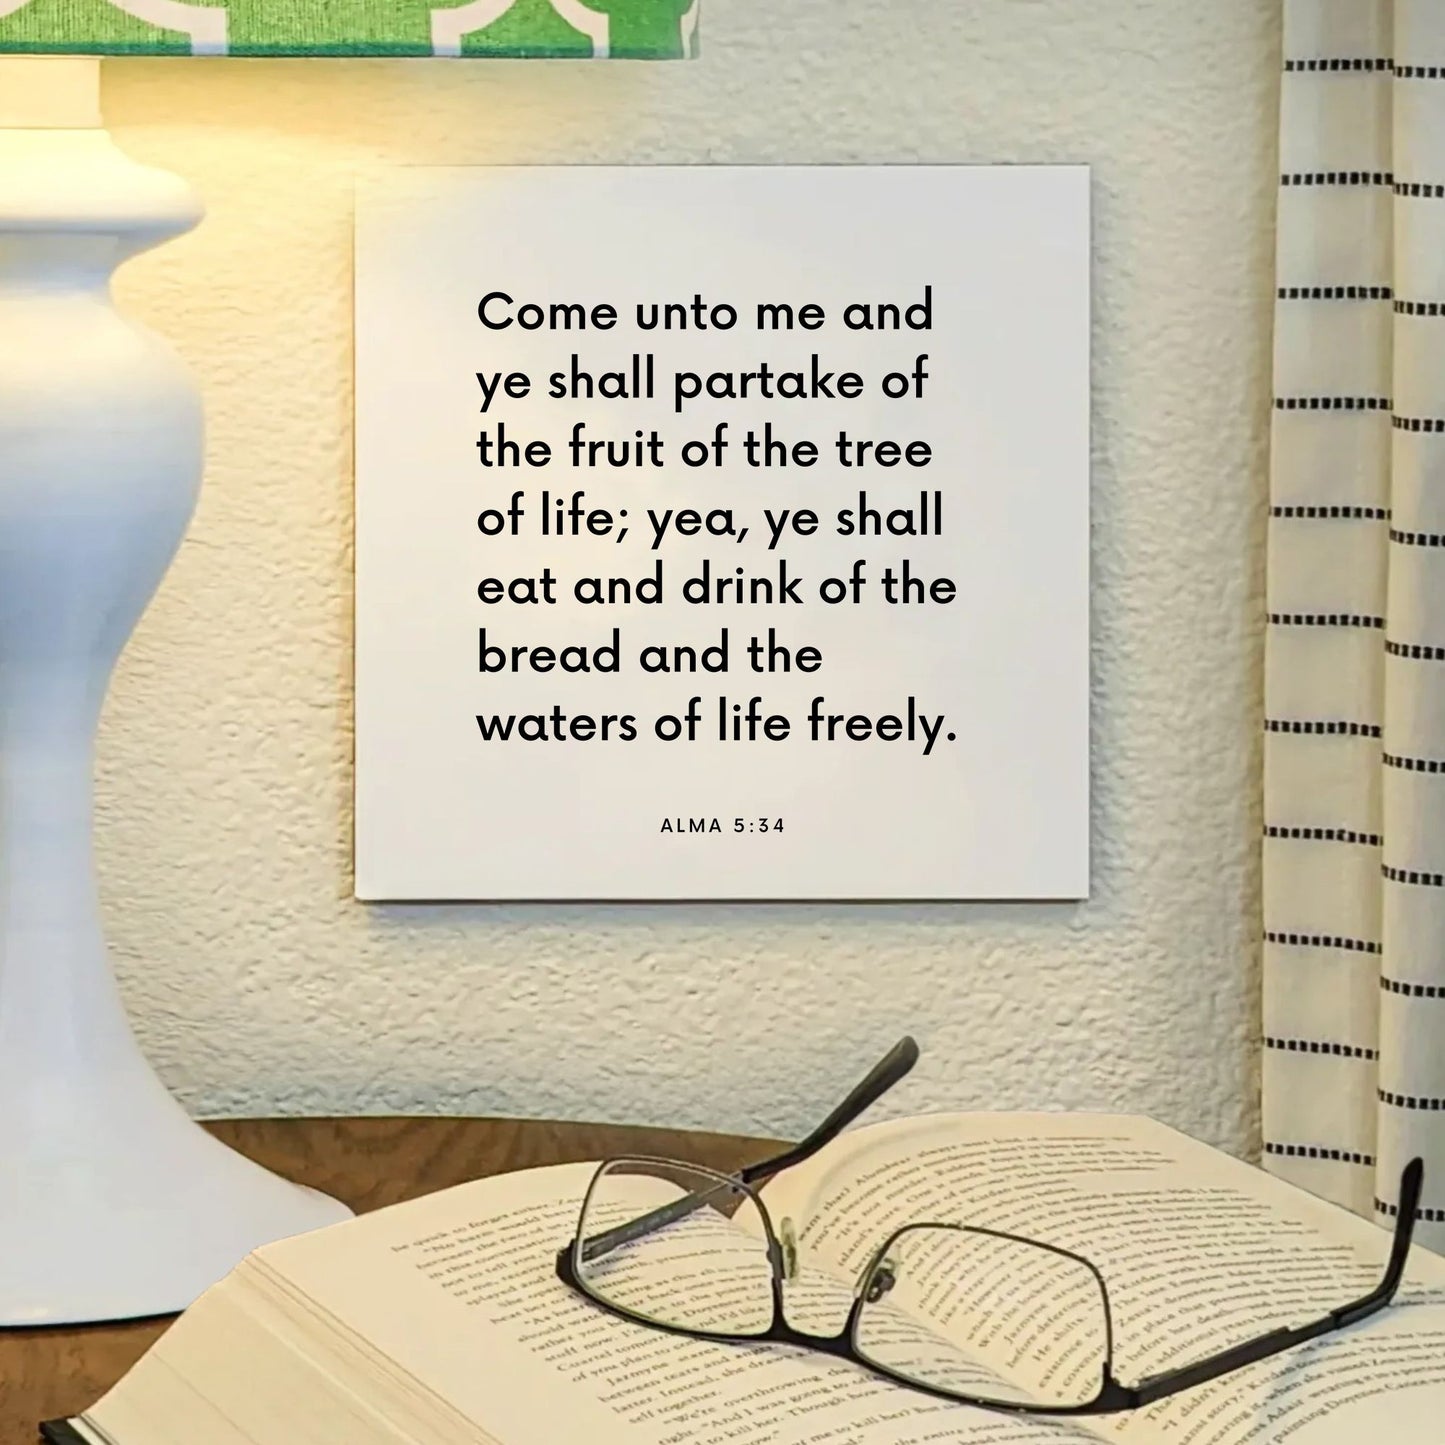 Lamp mouting of the scripture tile for Alma 5:34 - "Eat and drink of the bread and the waters of life freely"